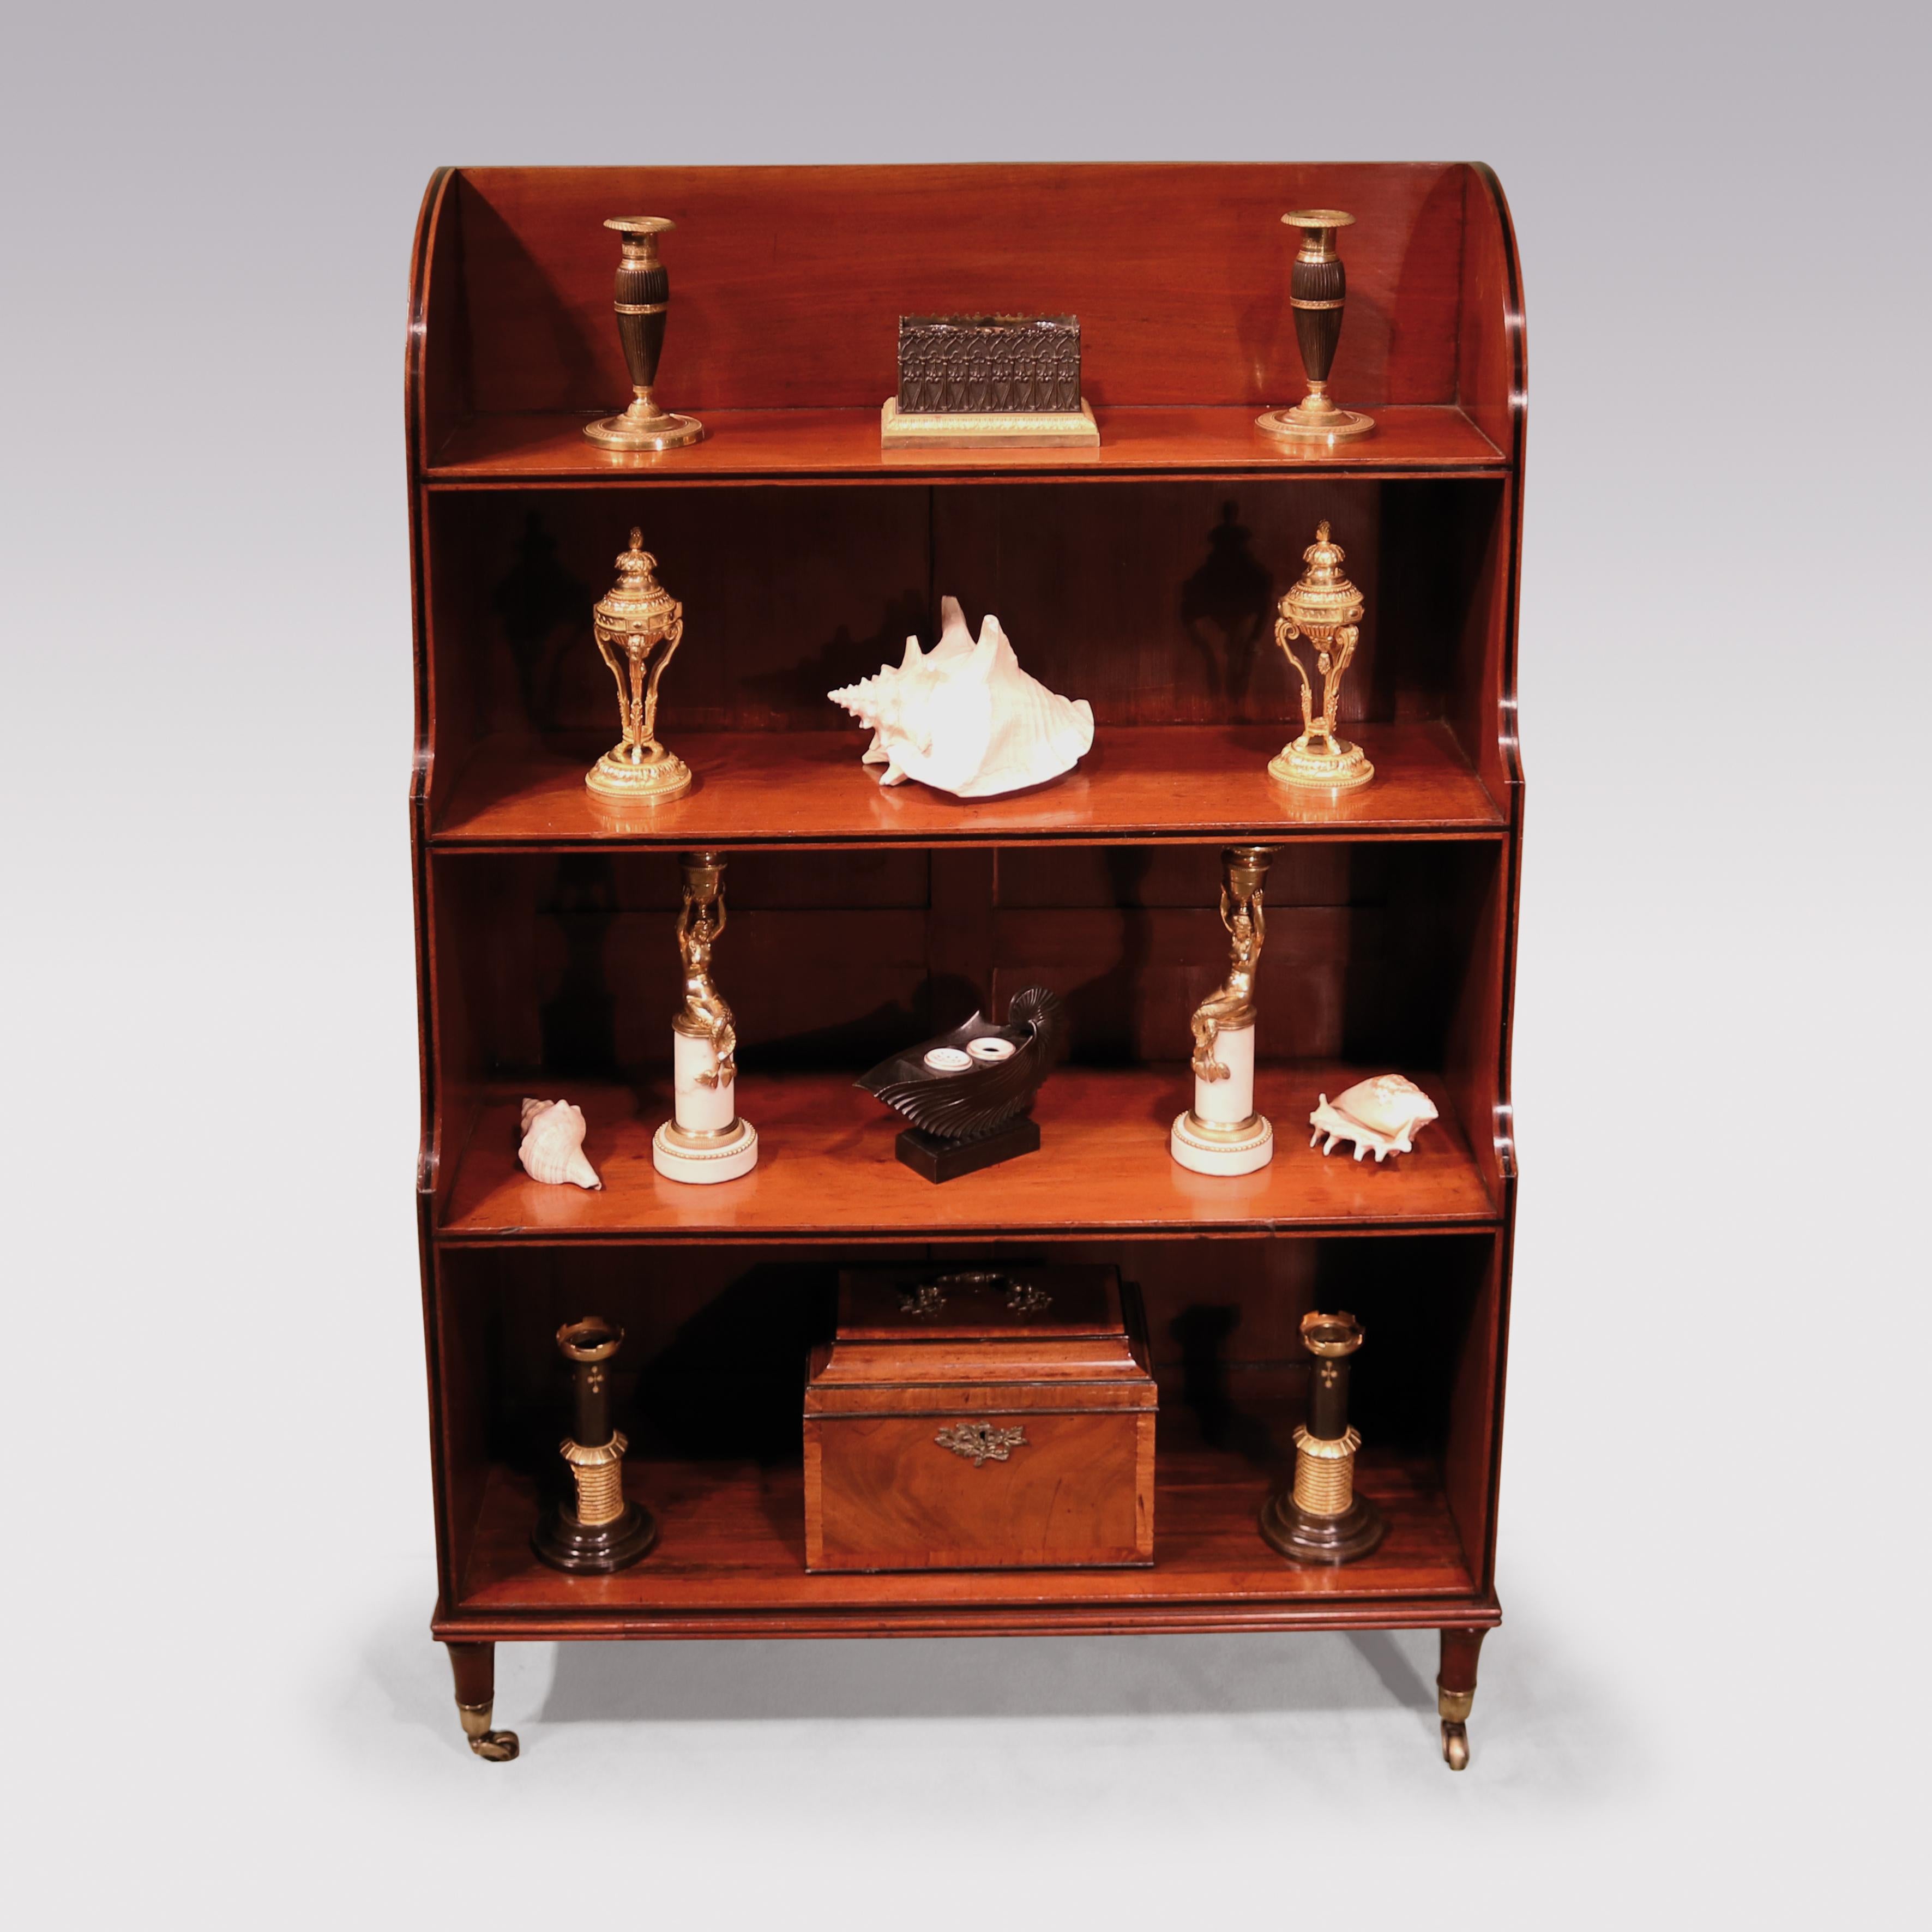 A George lll period figured mahogany Waterfall bookcase, having ebony banding to the shelves with shaped sides, supported on short turns legs ending on original castors.